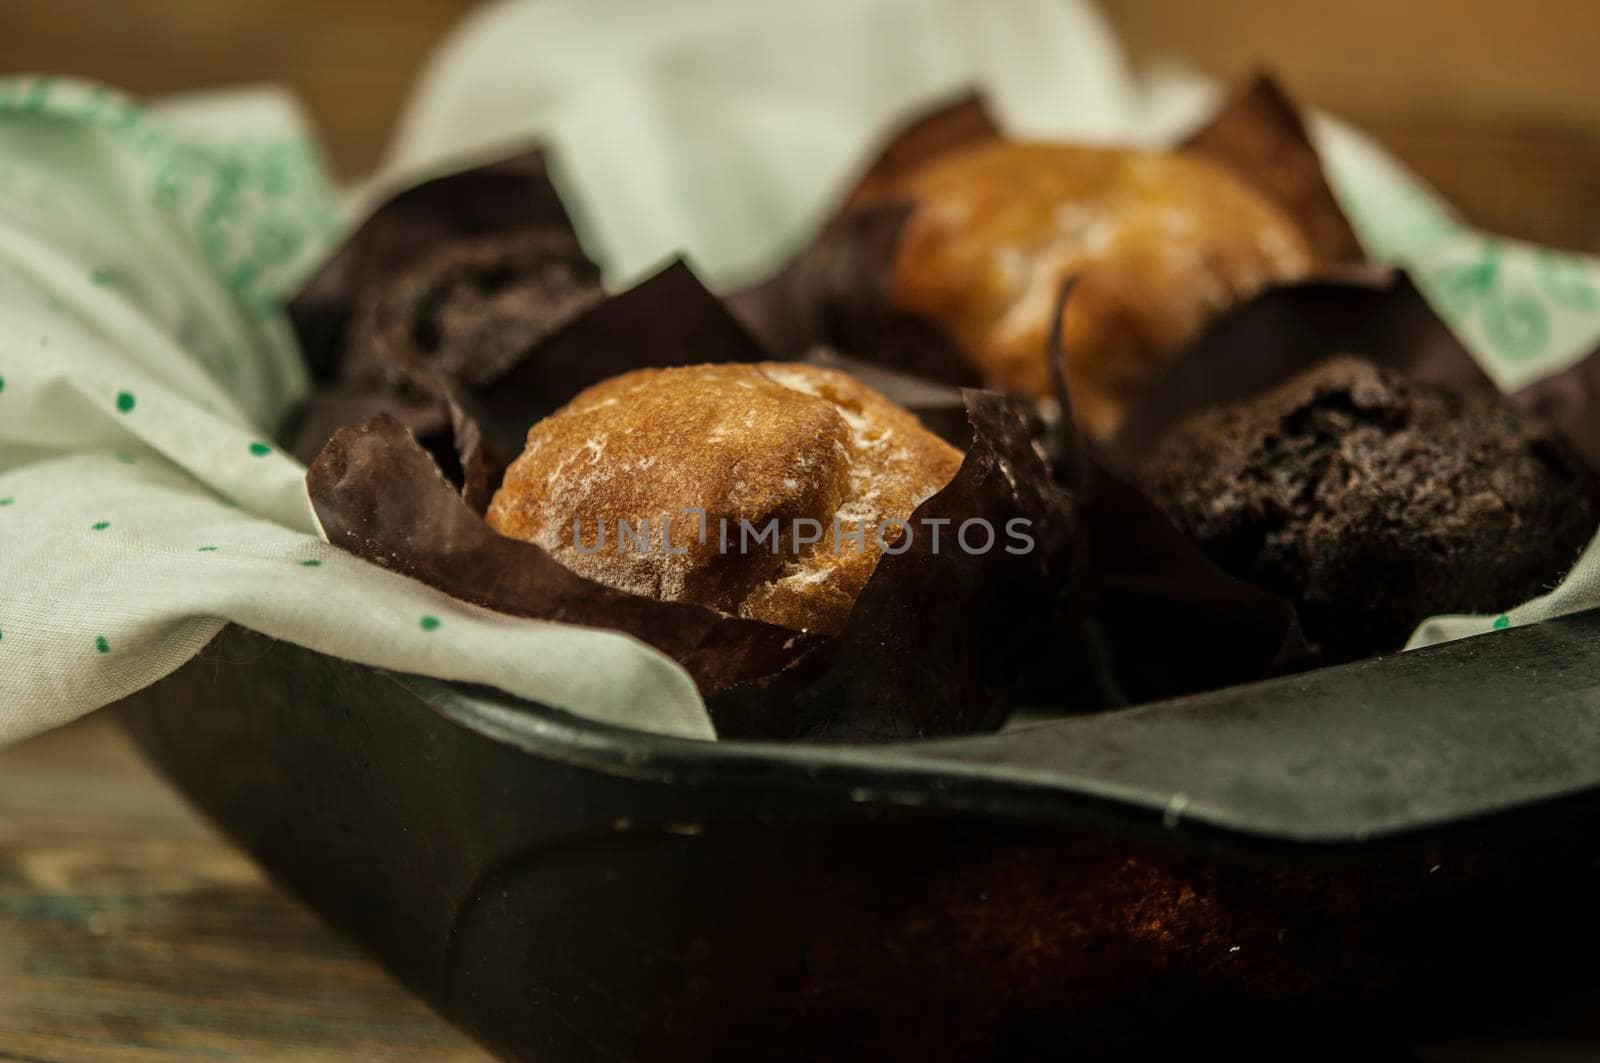 Homemade chocolate and vanilla cupcakes on a wooden table, sprinkled with powdered sugar. Breakfast by inxti